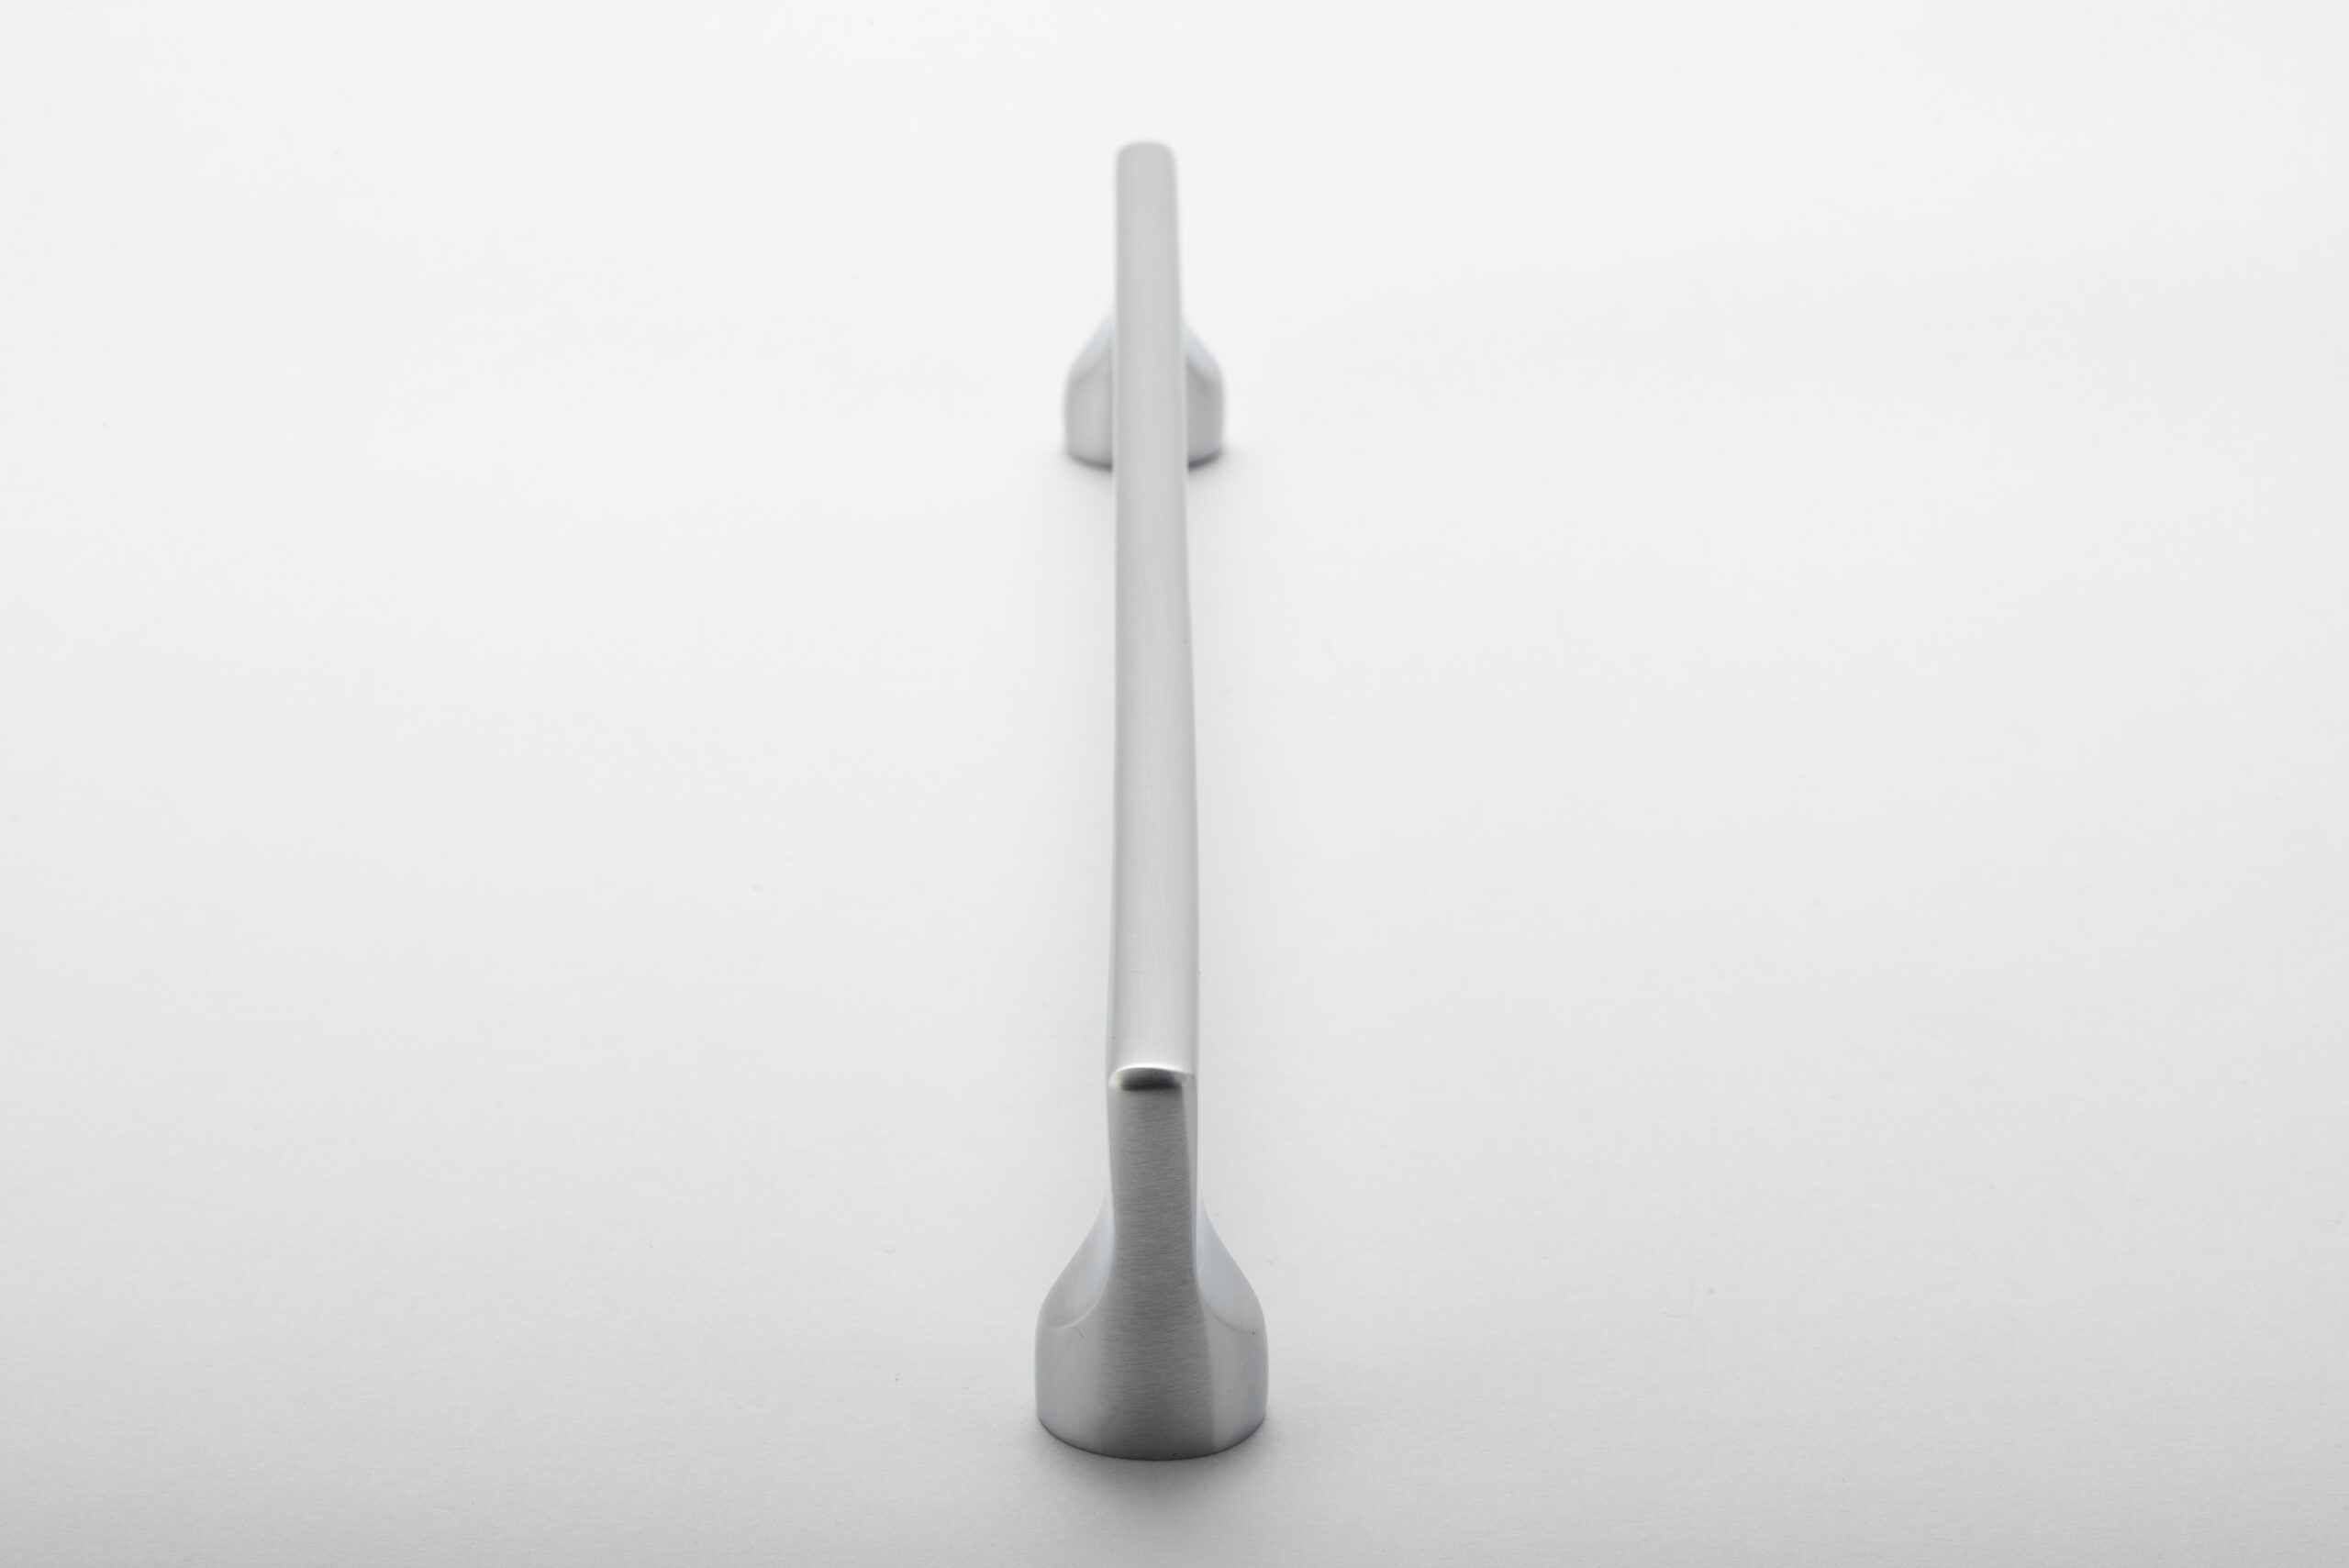 20925 - Baltimore Cabinet Pull - CTC450mm - Brushed Chrome